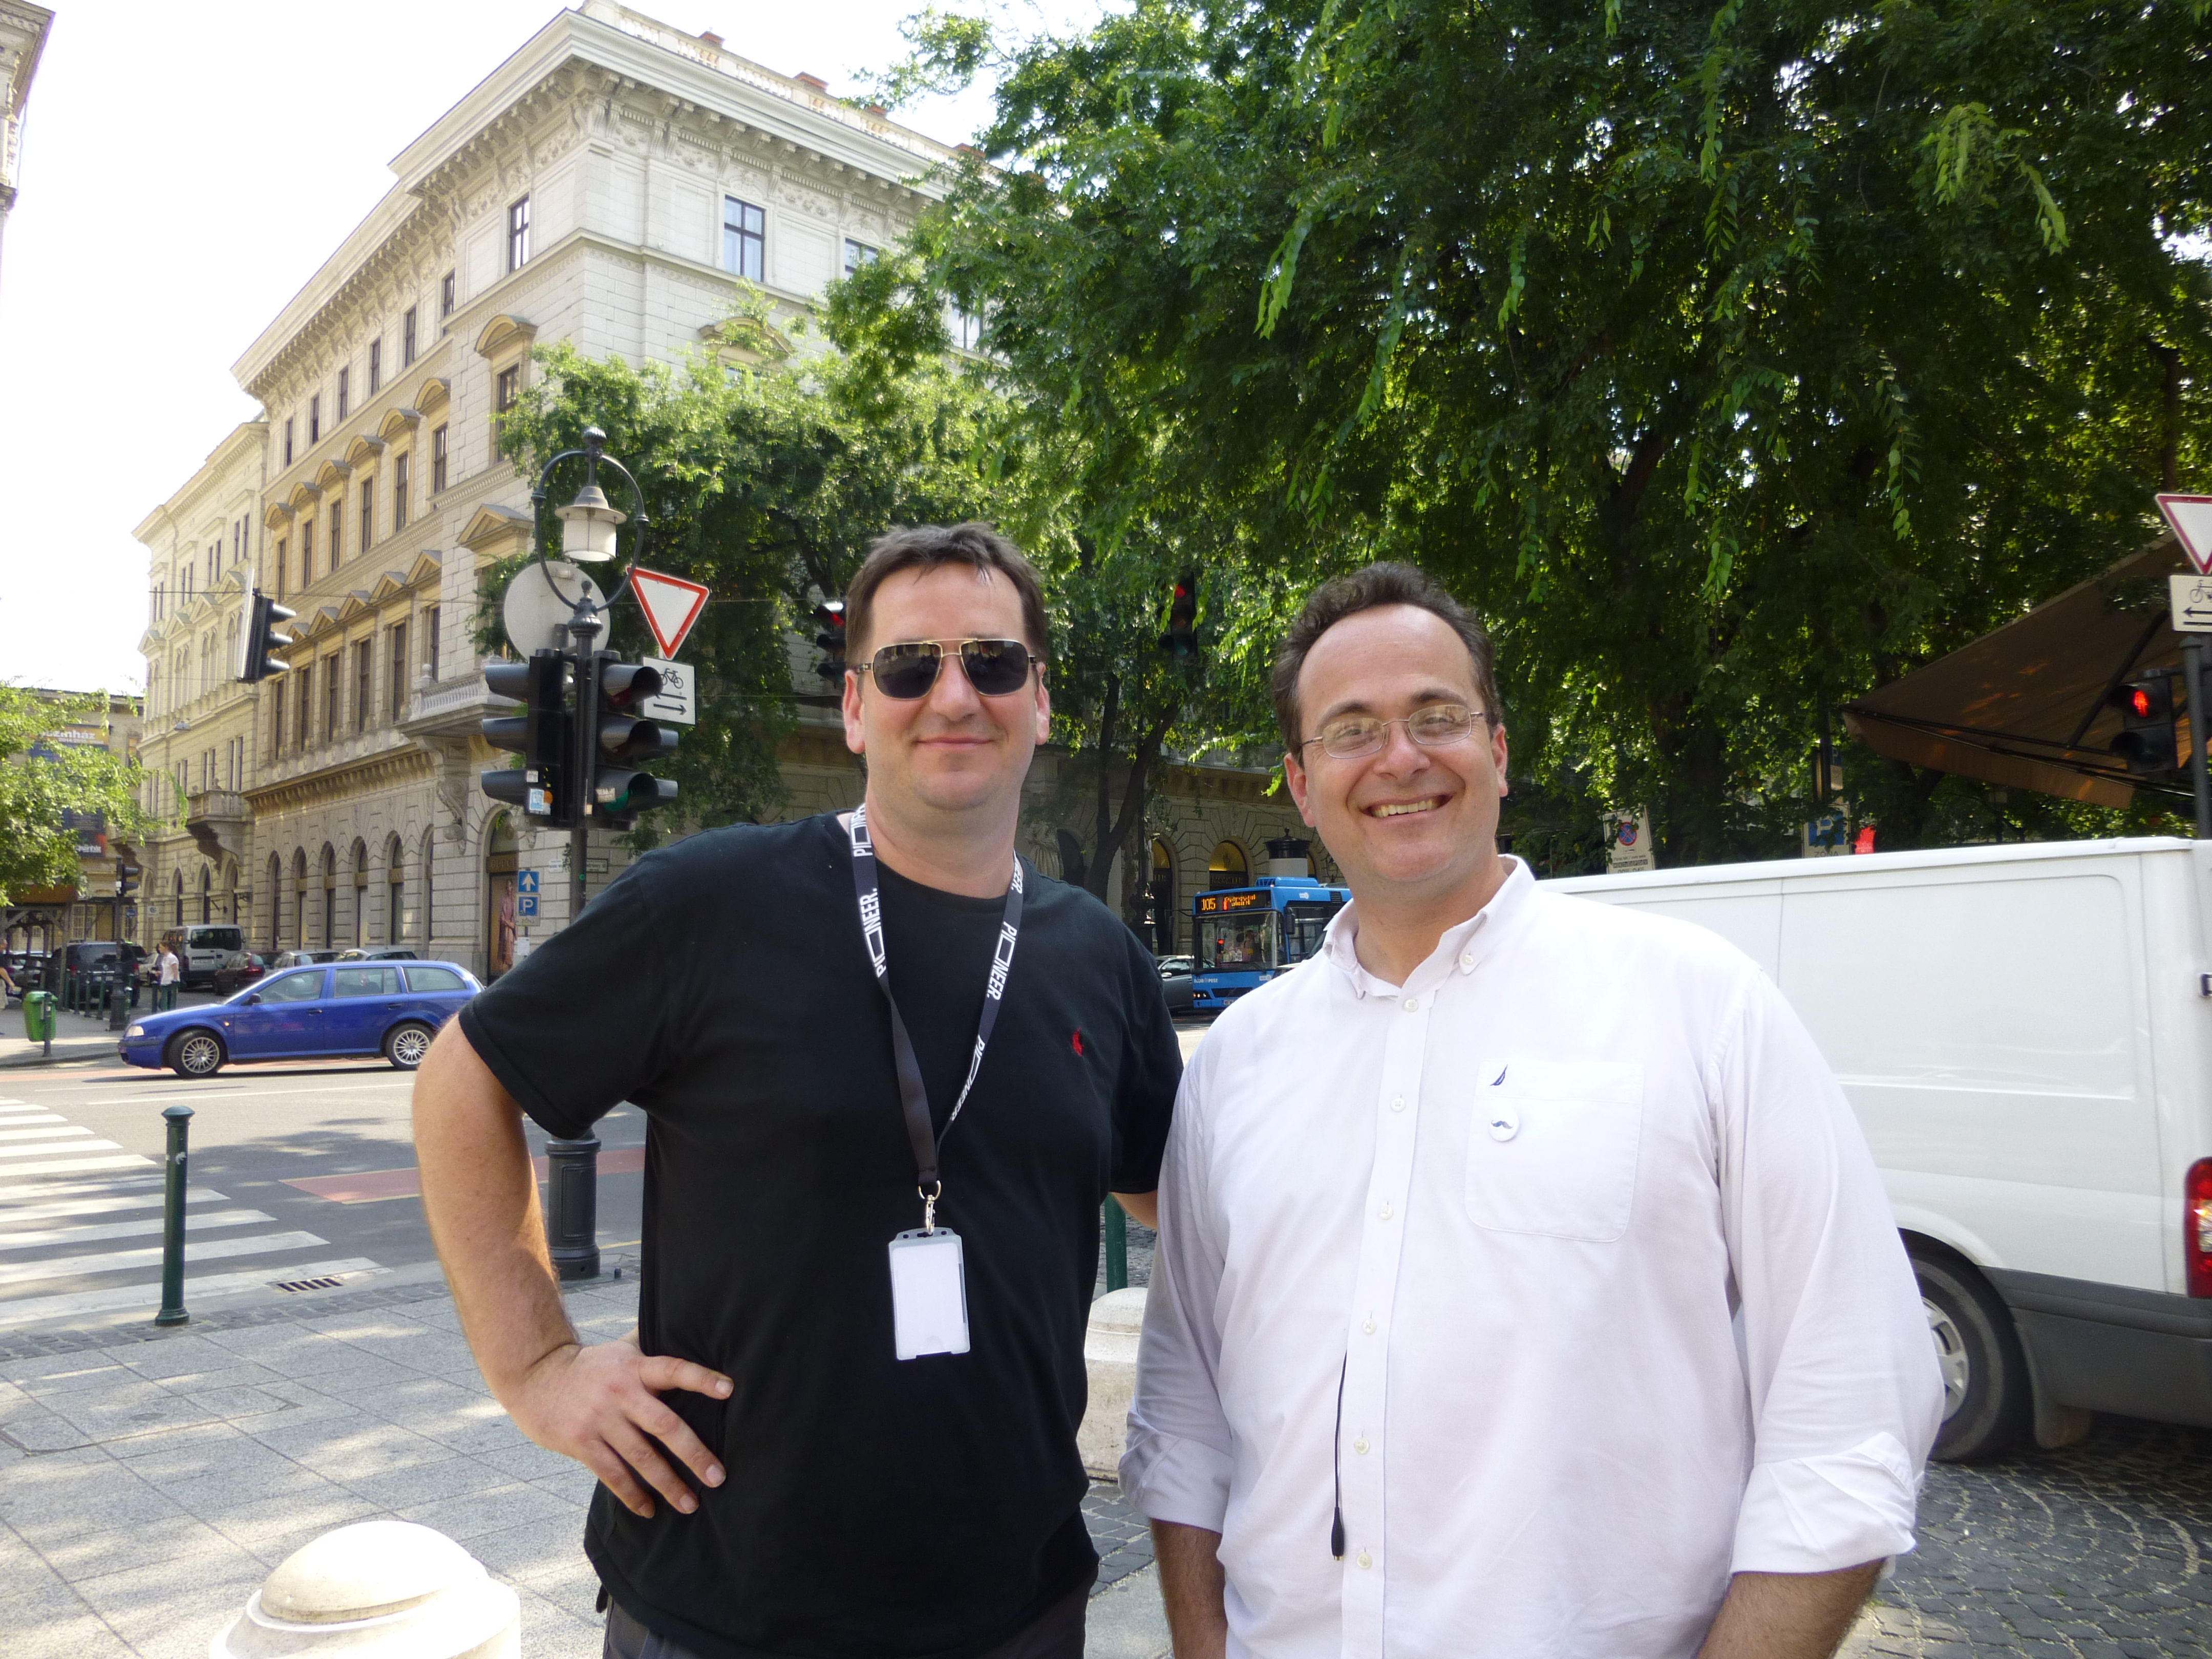 Producer Philip Waley with Director Vince Marcello on Set in Budapest 2014